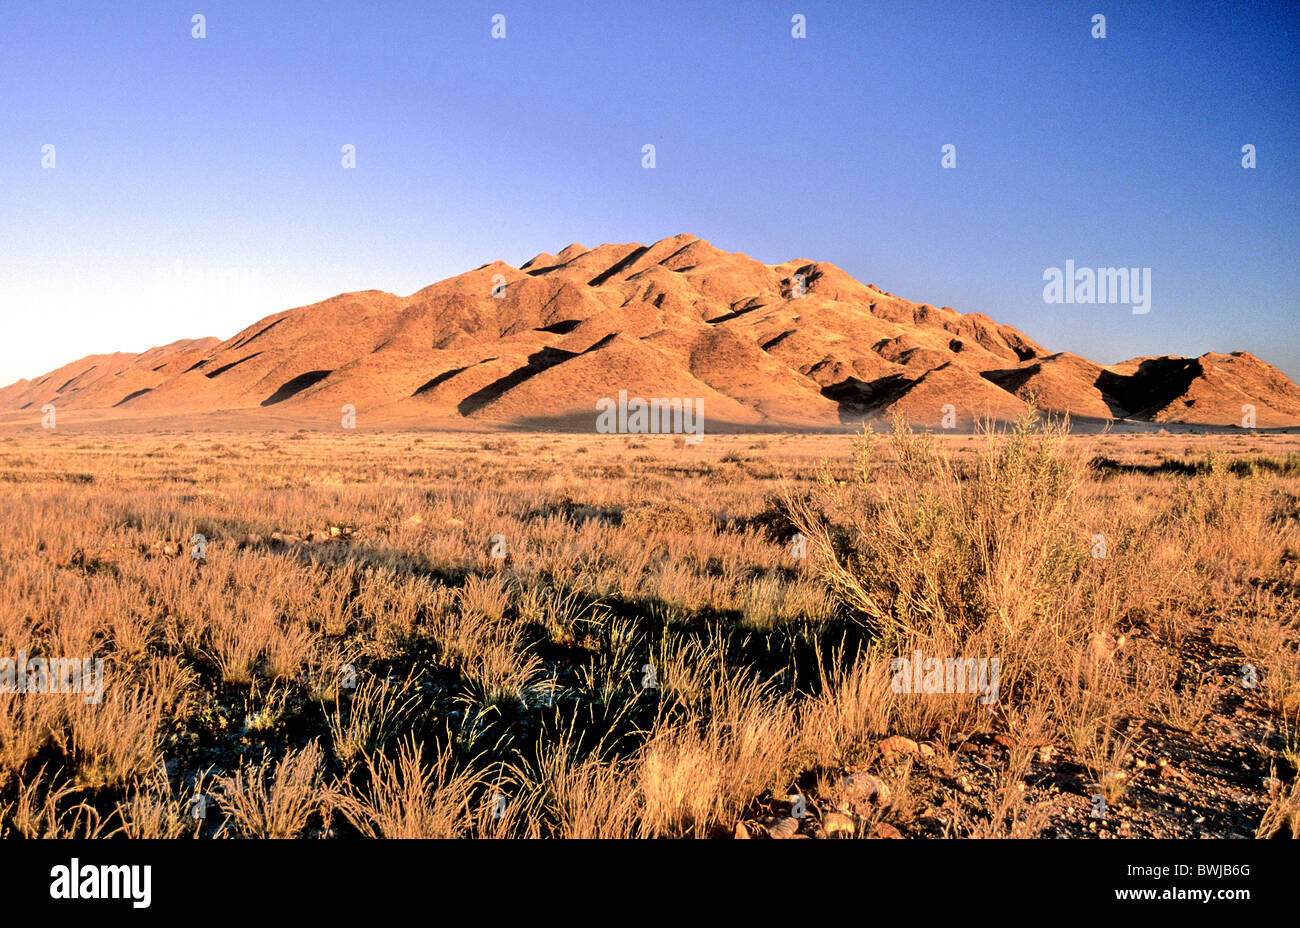 scenery landscape Africa Namibia South-West Africa mountains structures evening mood desert golden grass ste Stock Photo